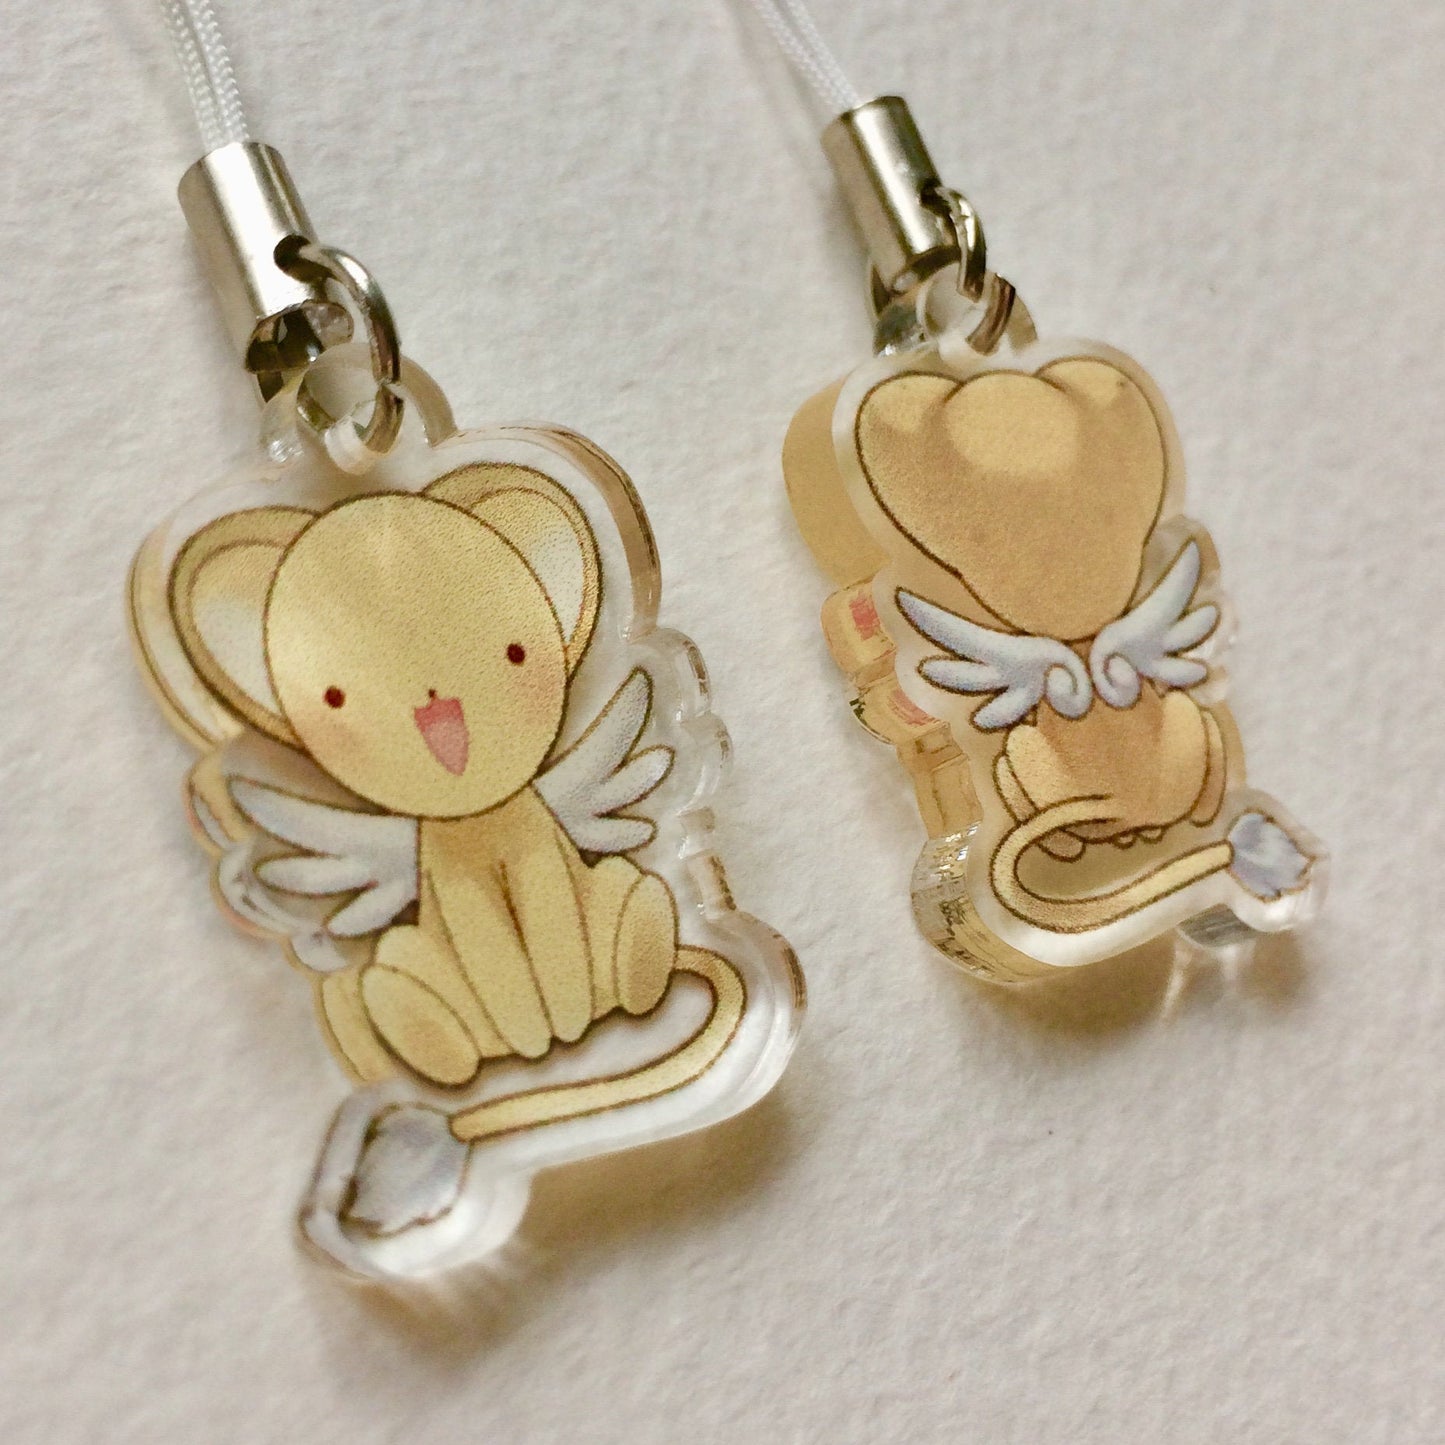 Kero Double-Sided Clear Acrylic and Epoxy Resin Charm